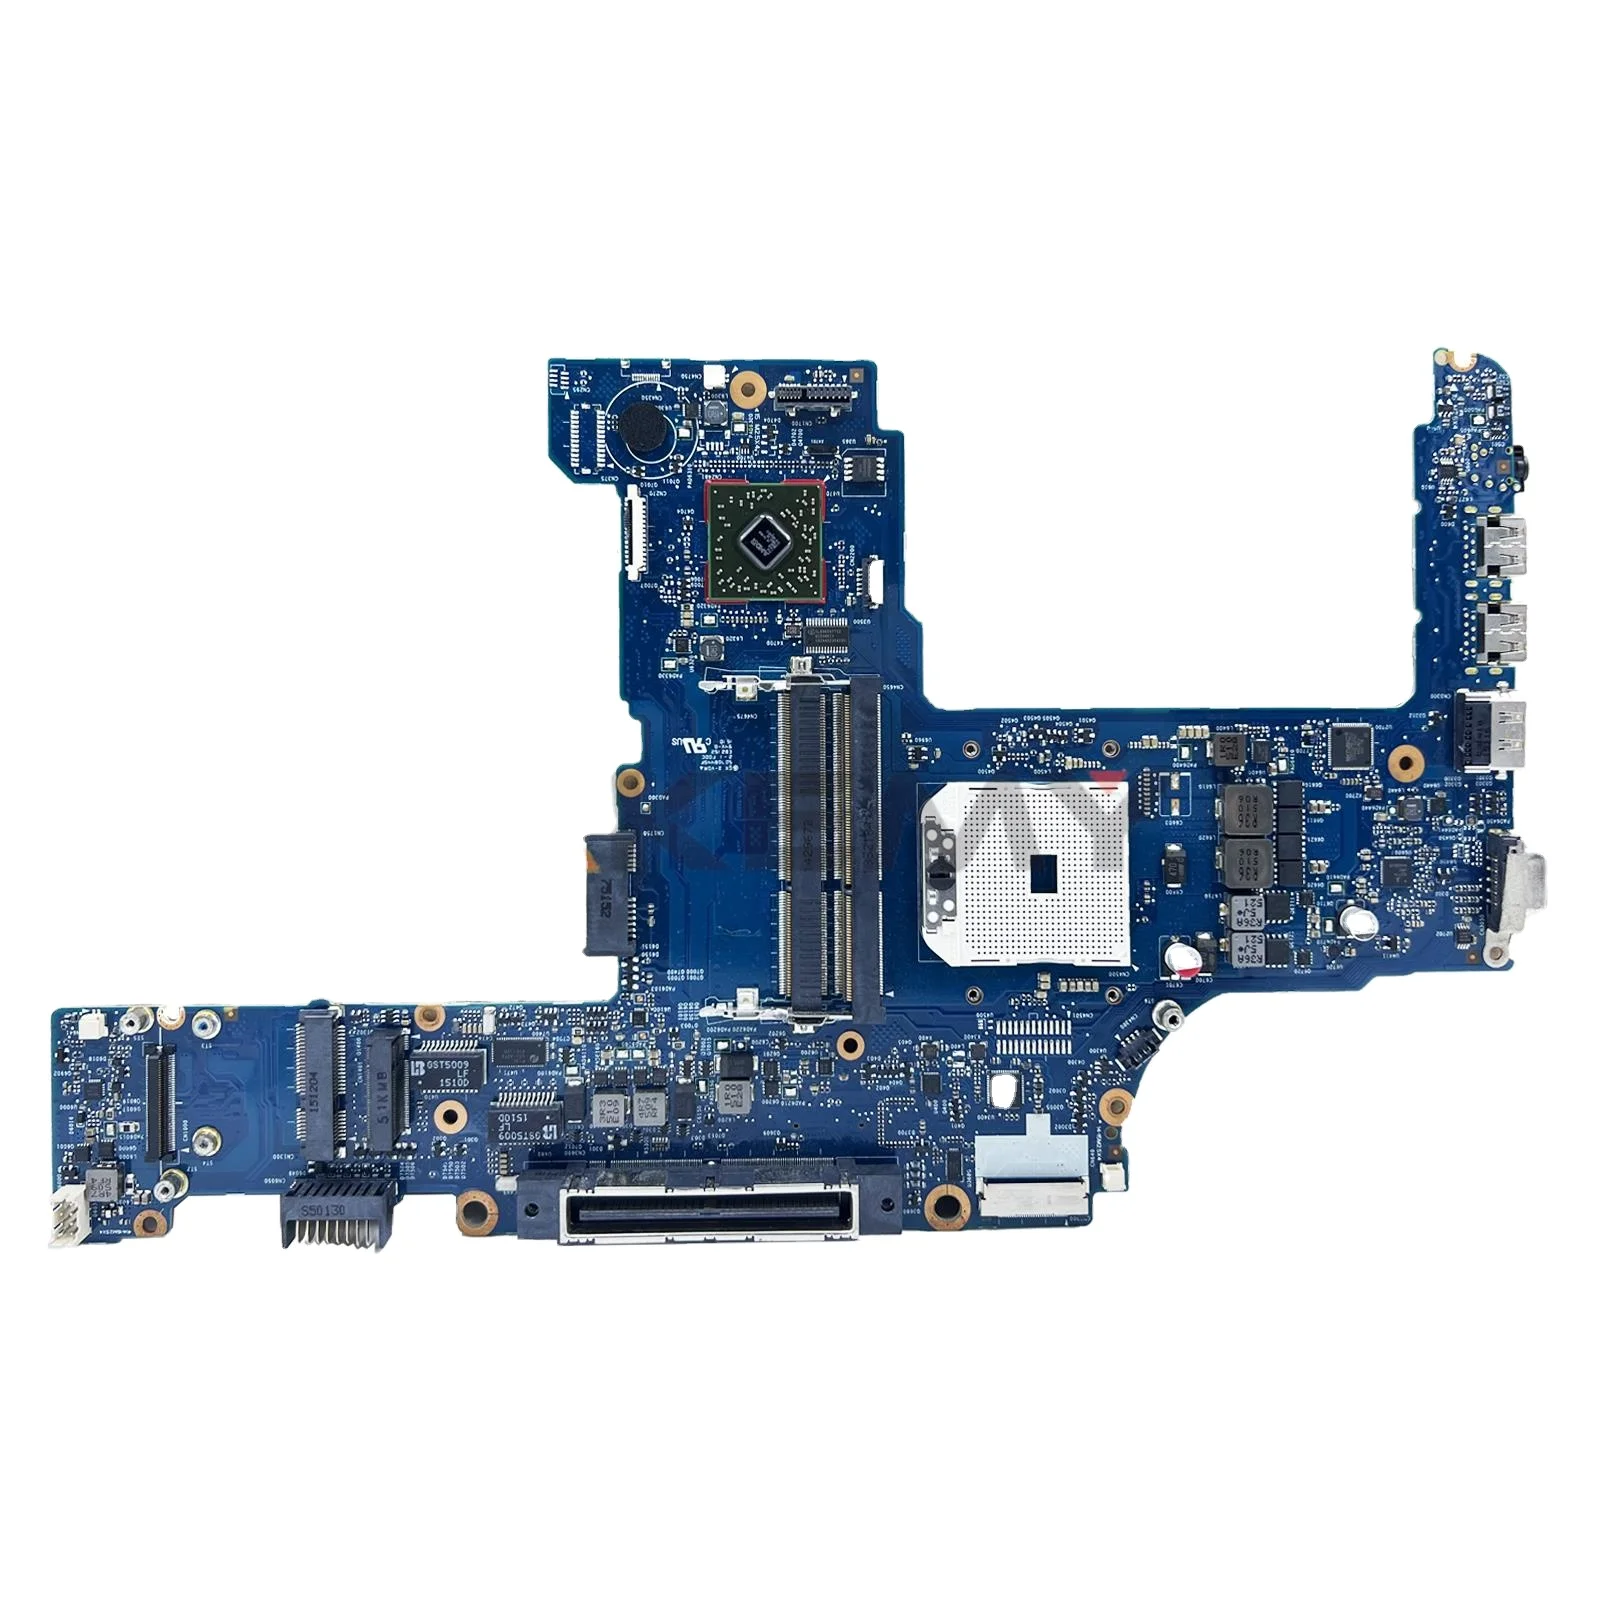 

6050A2567101-MB-A02 For HP Probook 645 655 G1 Laptop motherboard PN 745886-001 746017-501 746017-601 745883-601